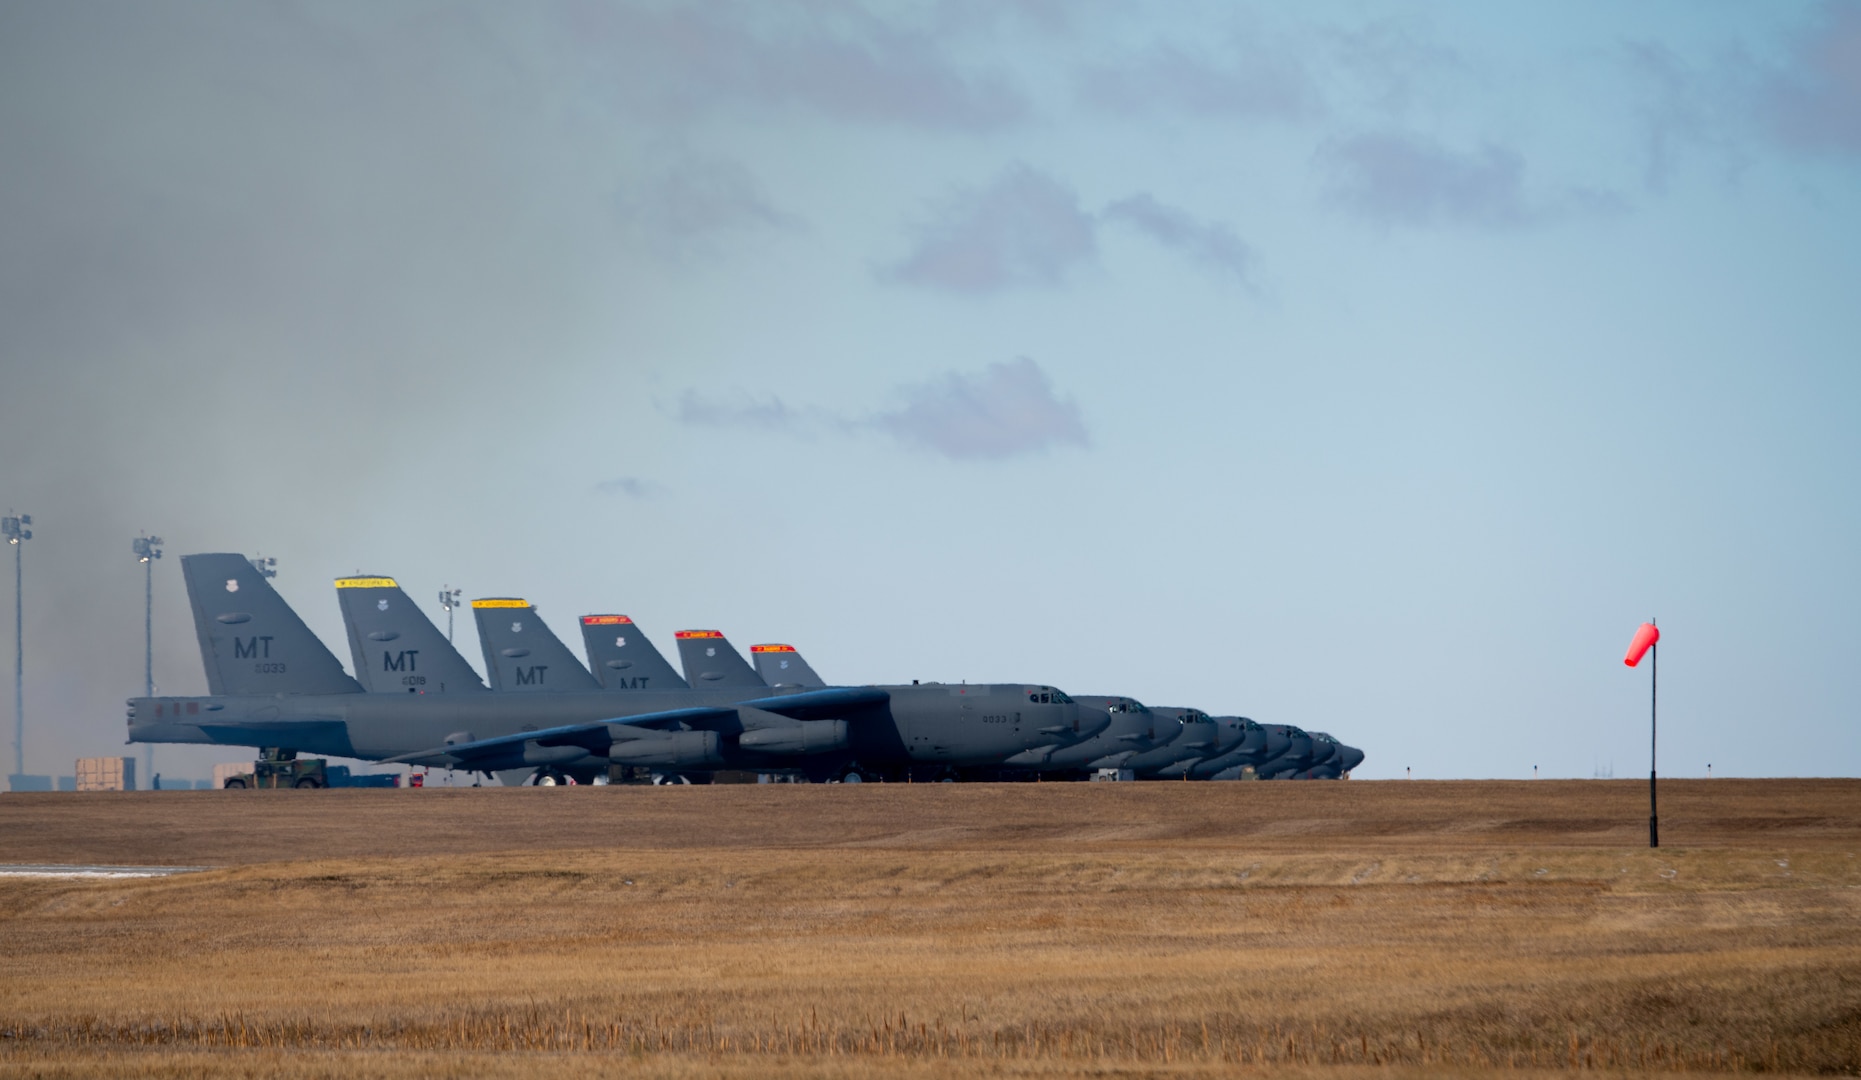 Multiple B-52H Stratofortress aircrafts are parked on the flightline as part of an exercise, Global Thunder 21, on Oct. 23, 2020 at Minot Air Force Base, North Dakota. U.S. Strategic Command conducts global operations in coordination with other combatant commands, services and appropriate U.S. government agencies to deter, detect and, if necessary, defeat strategic attacks against the United States and its allies.